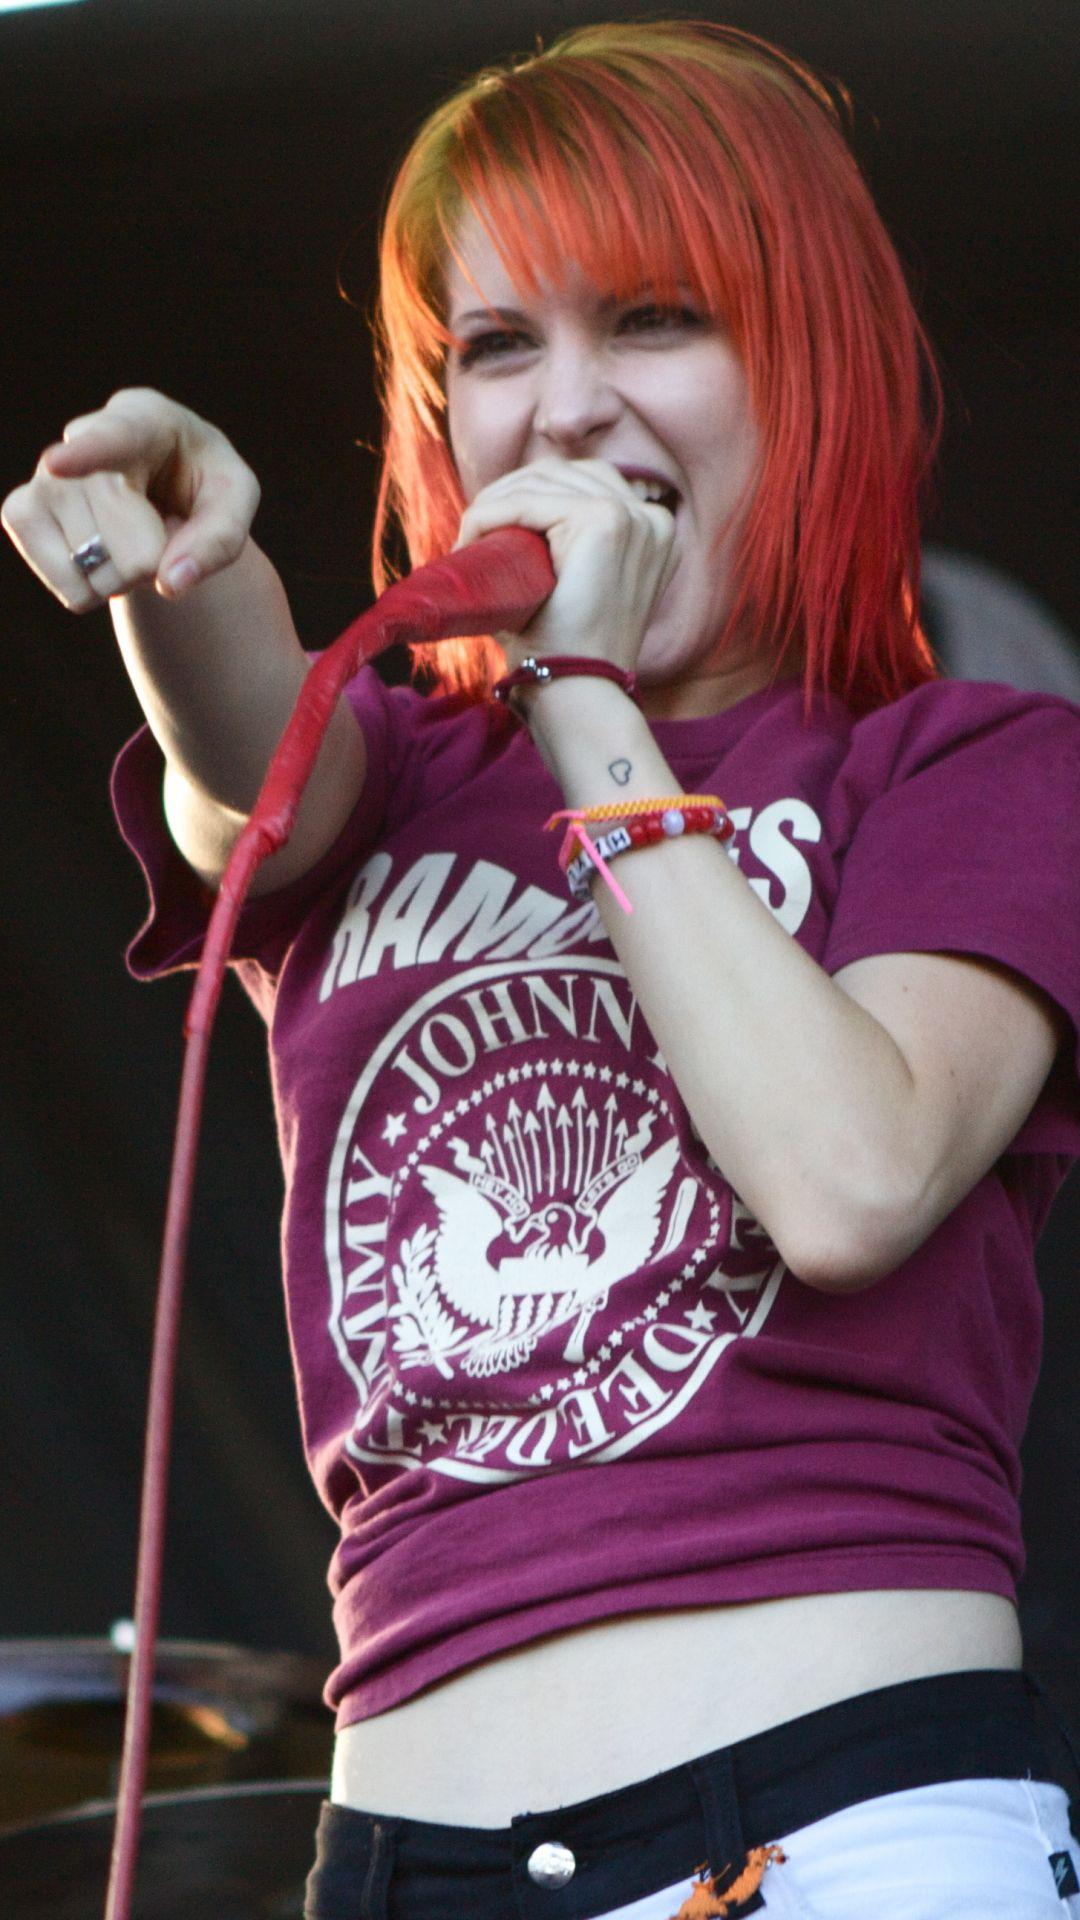 Top more than 80 hayley williams wallpaper - in.cdgdbentre